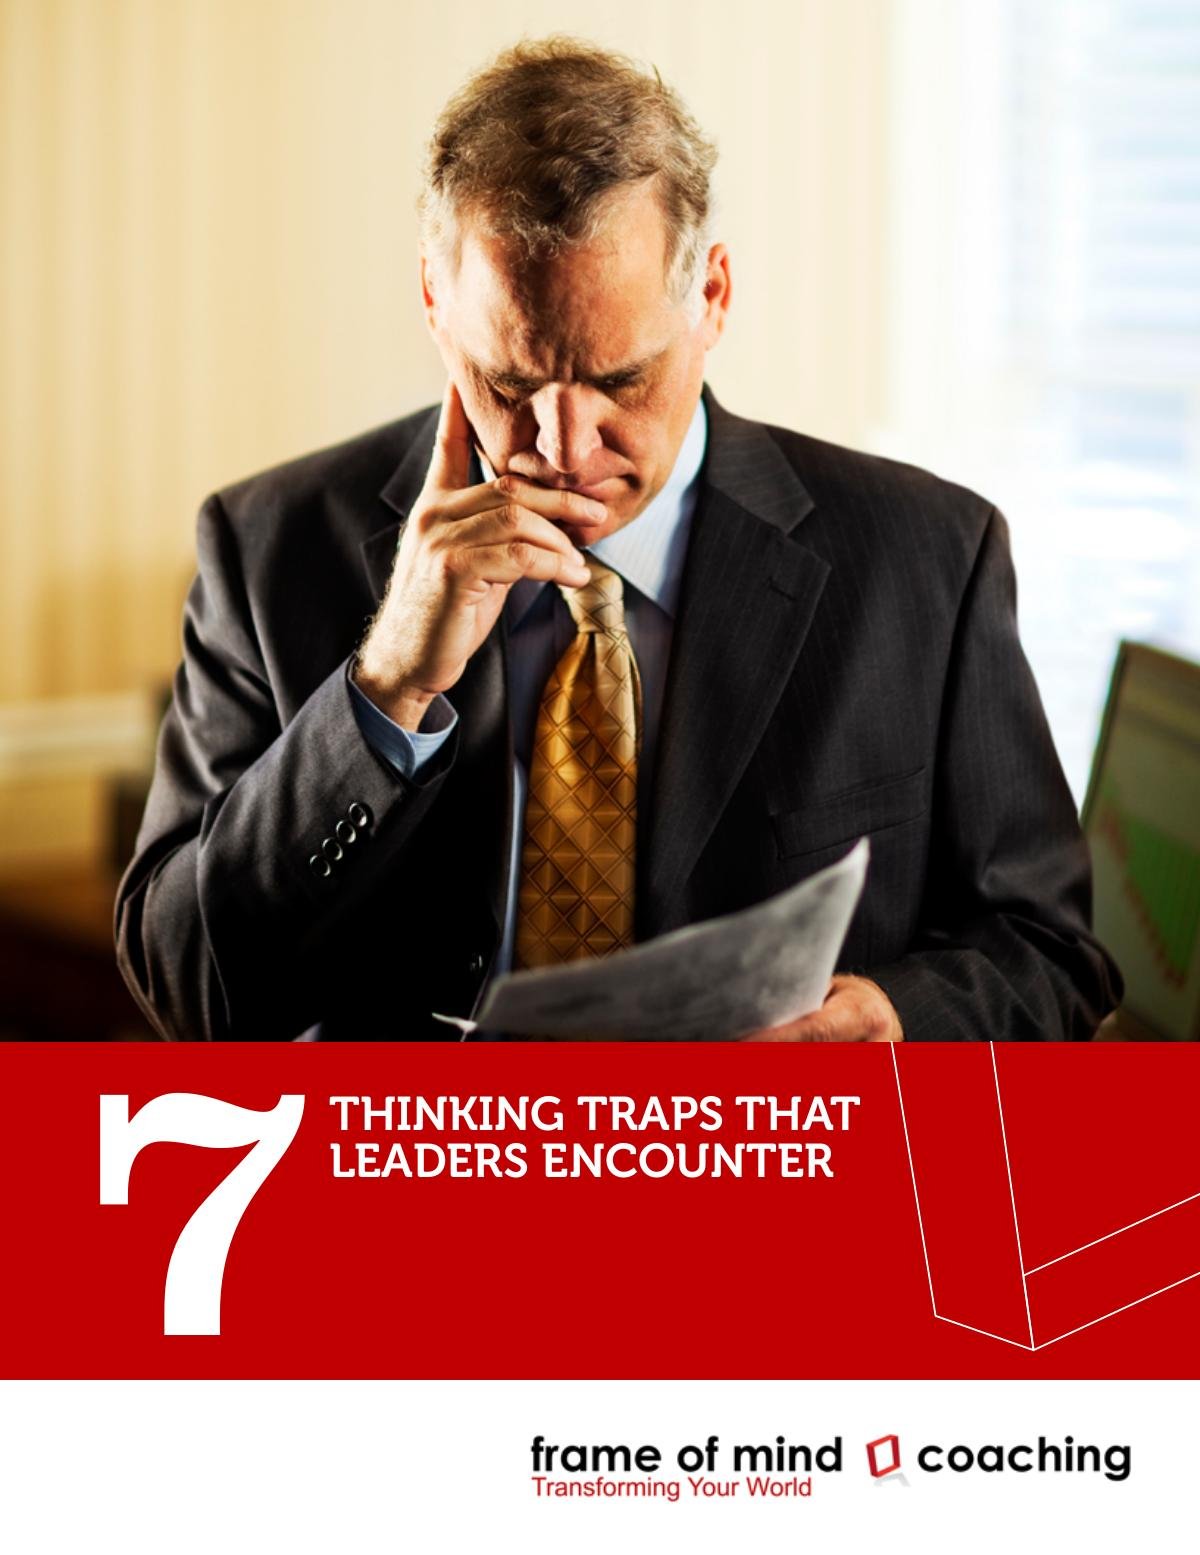 7 Thinking Traps that Leaders Encounter